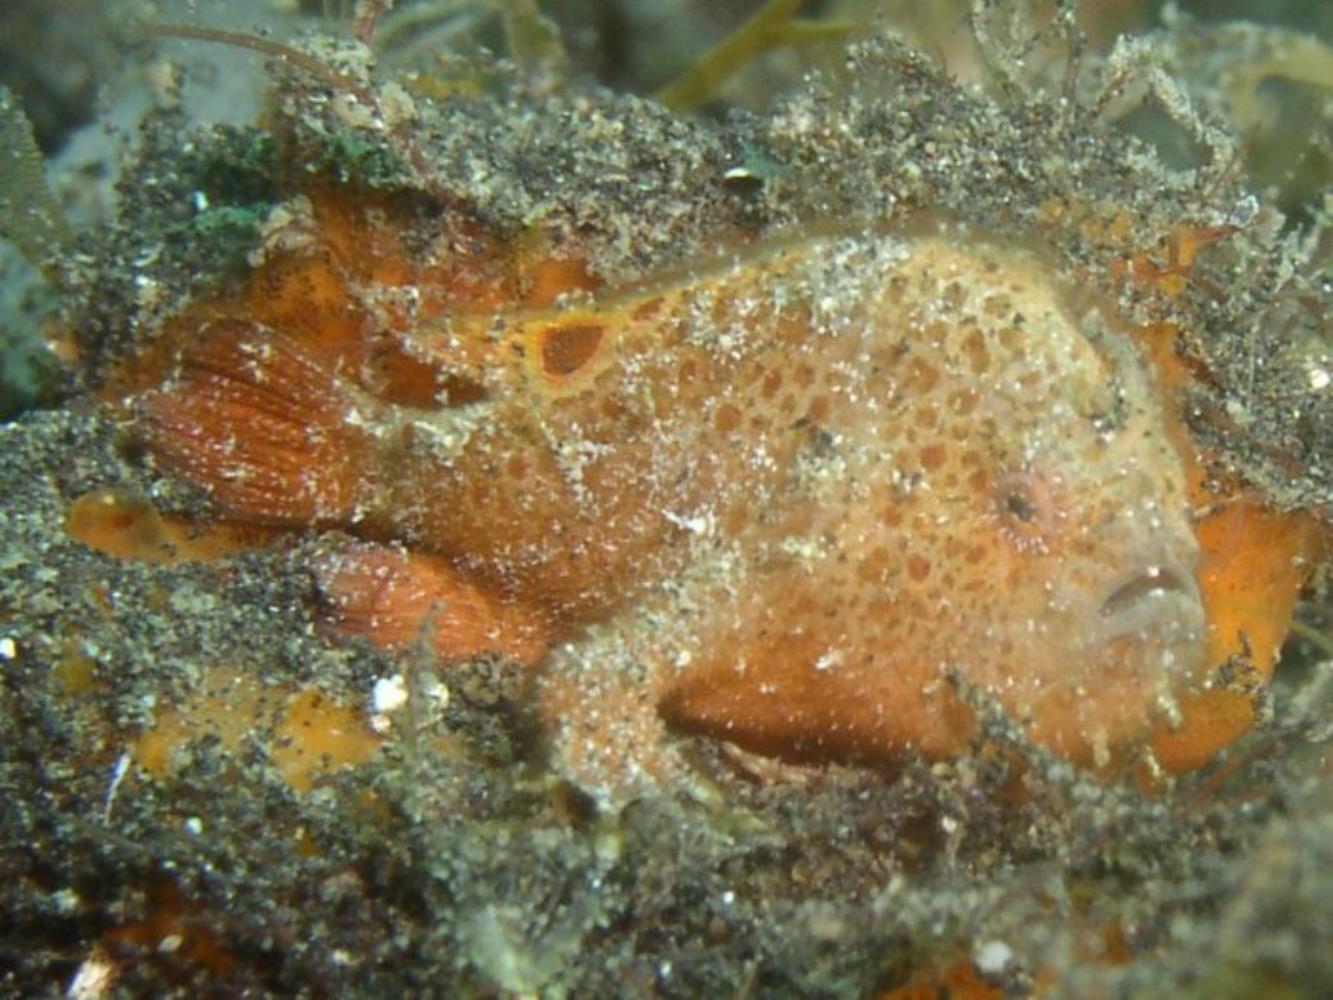 Spiny-tufted frogfish